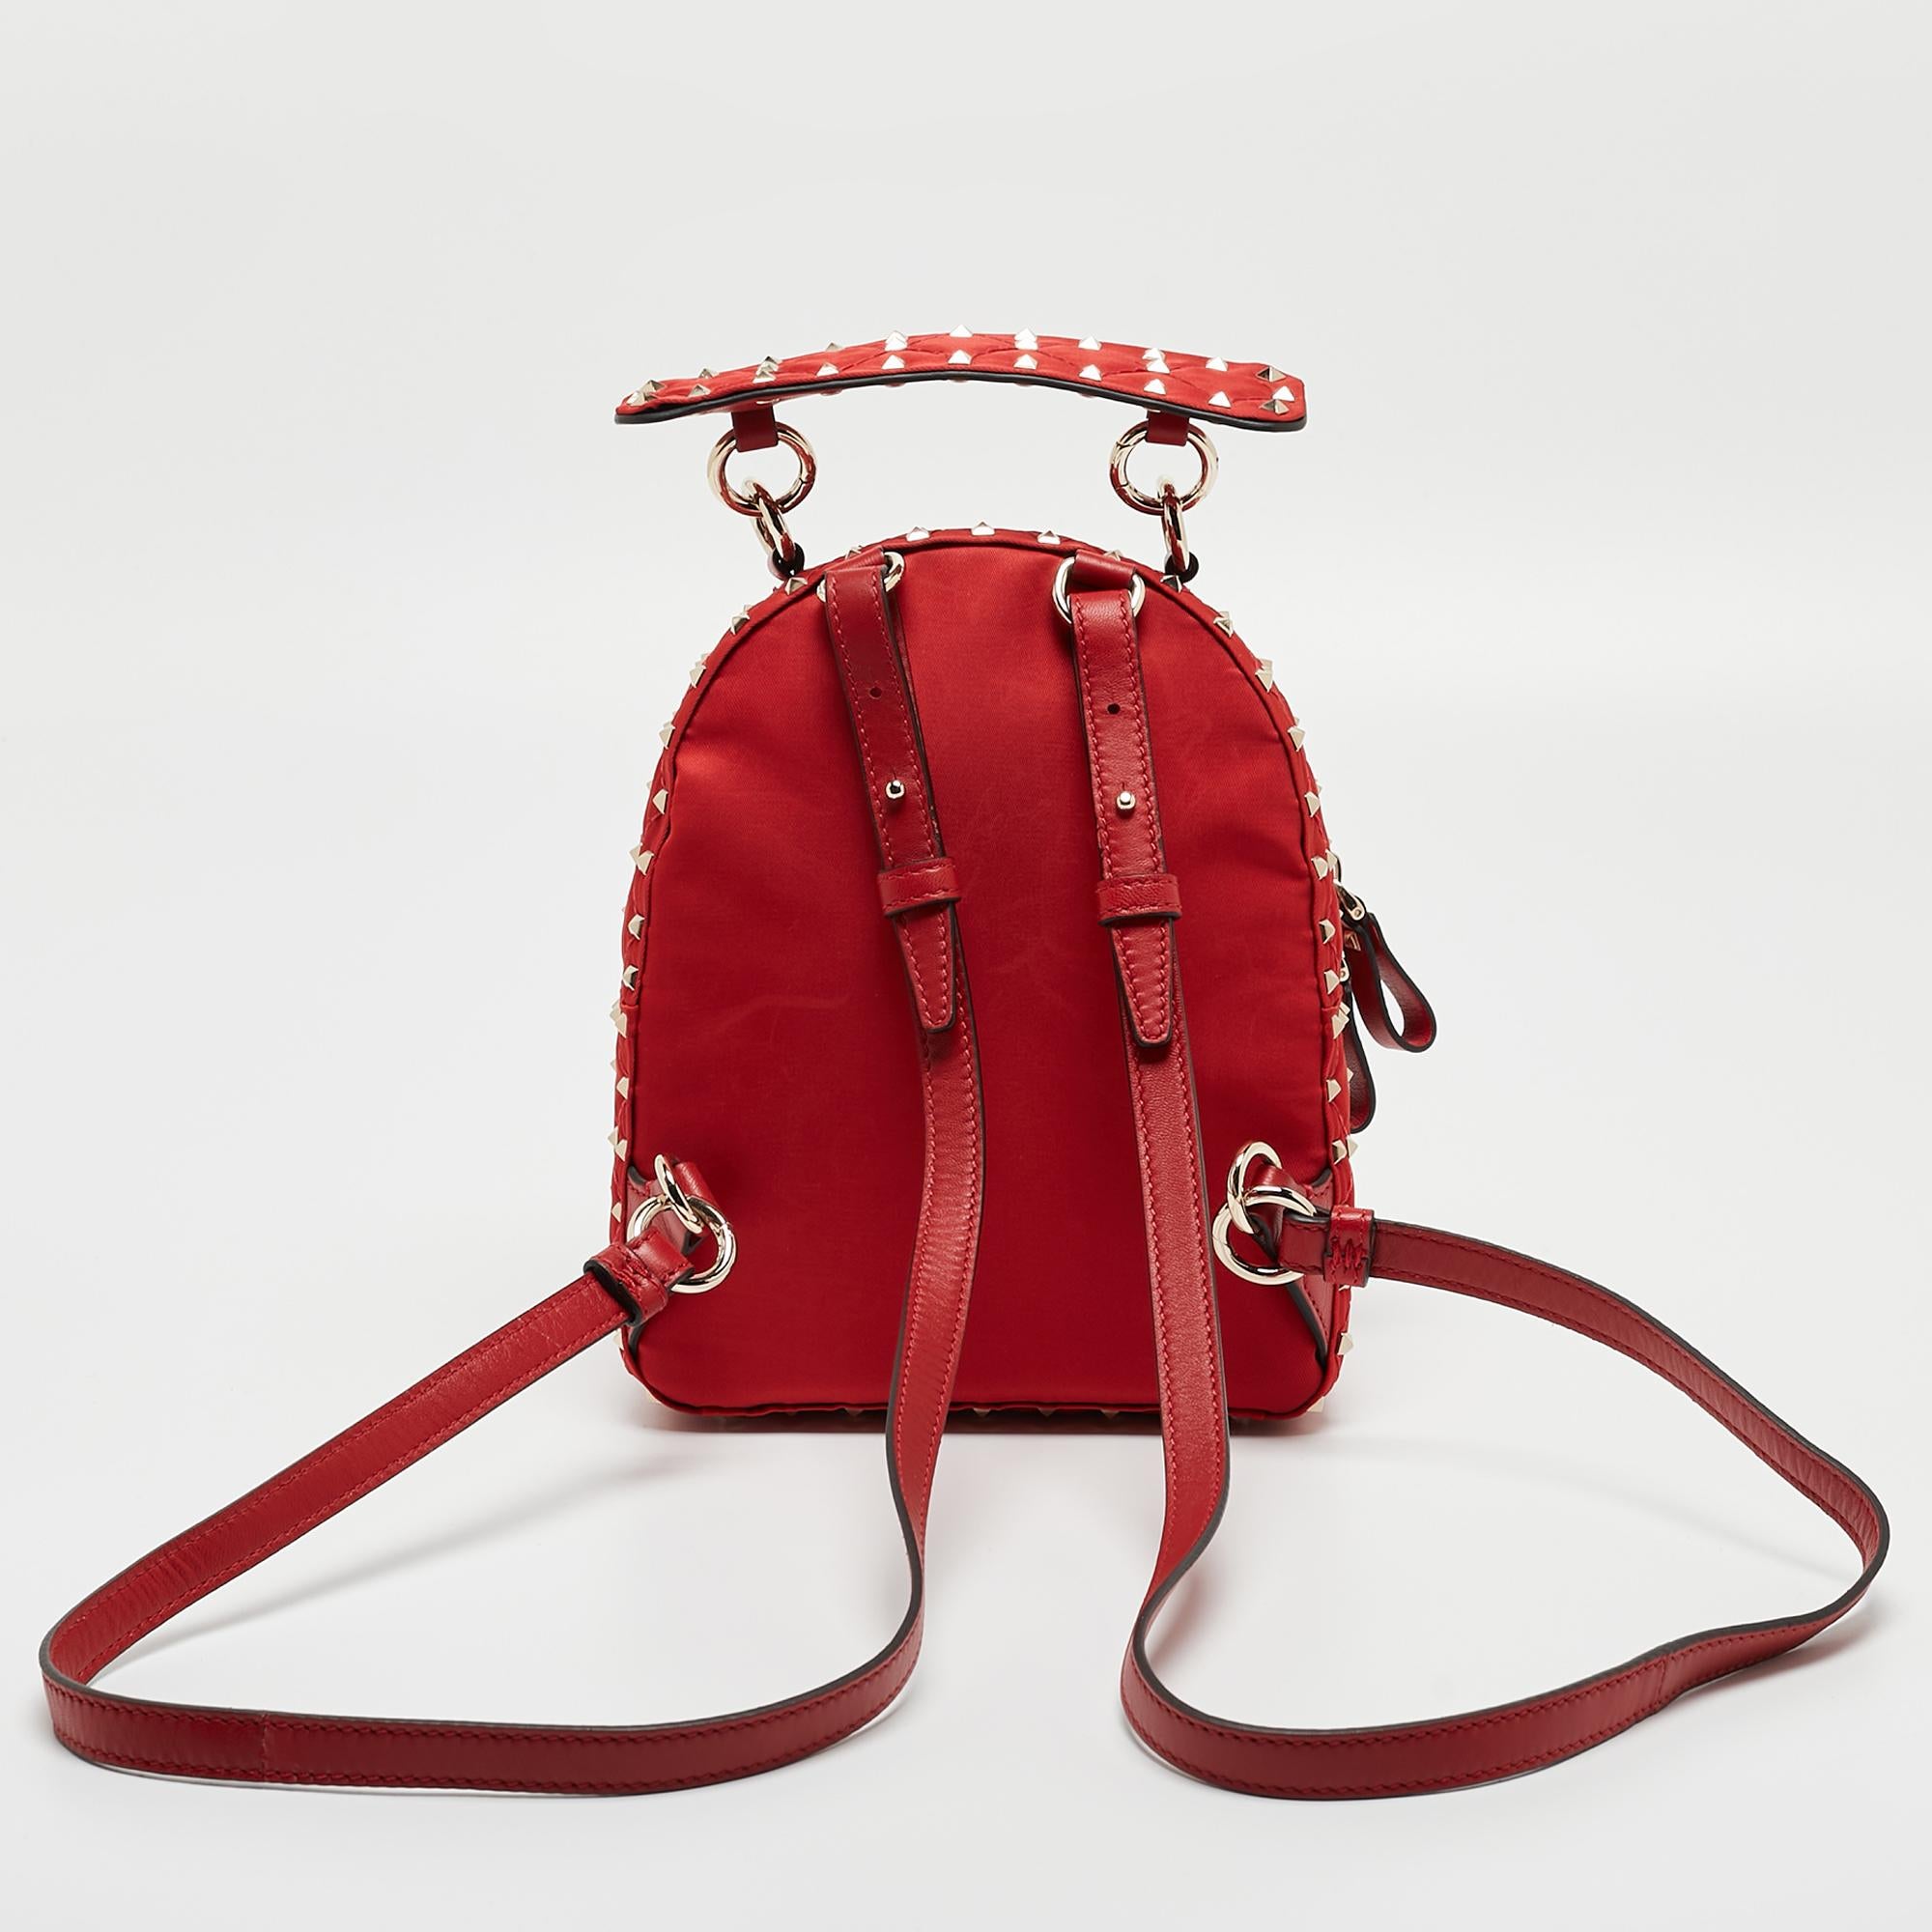 Ditch those regular totes for this chic Valentino backpack. Decorated with the iconic Rockstuds and a quilted design all over, this red backpack features a main zipper compartment along with an exterior zip pocket. It comes with a top handle and